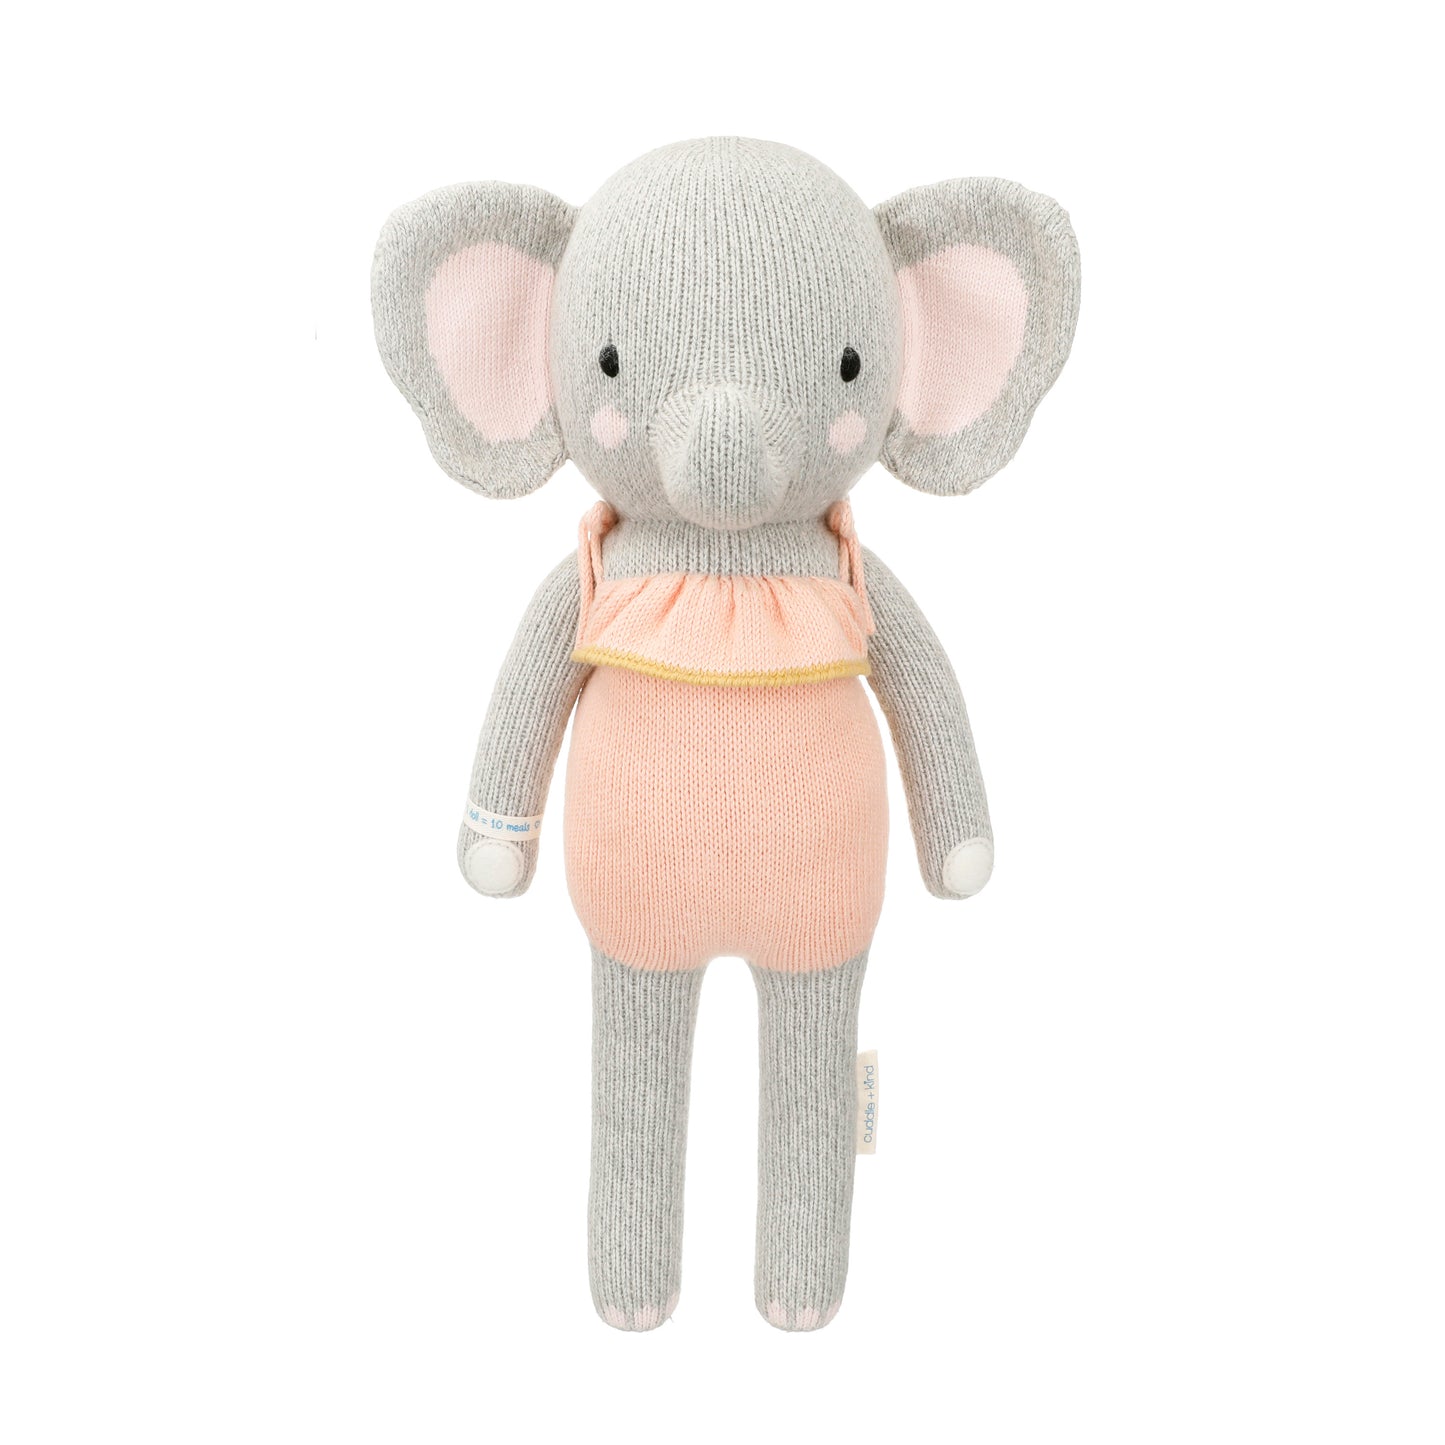 Eloise the elephant shown from 360°. Eloise is wearing a pink romper with a ruffle.